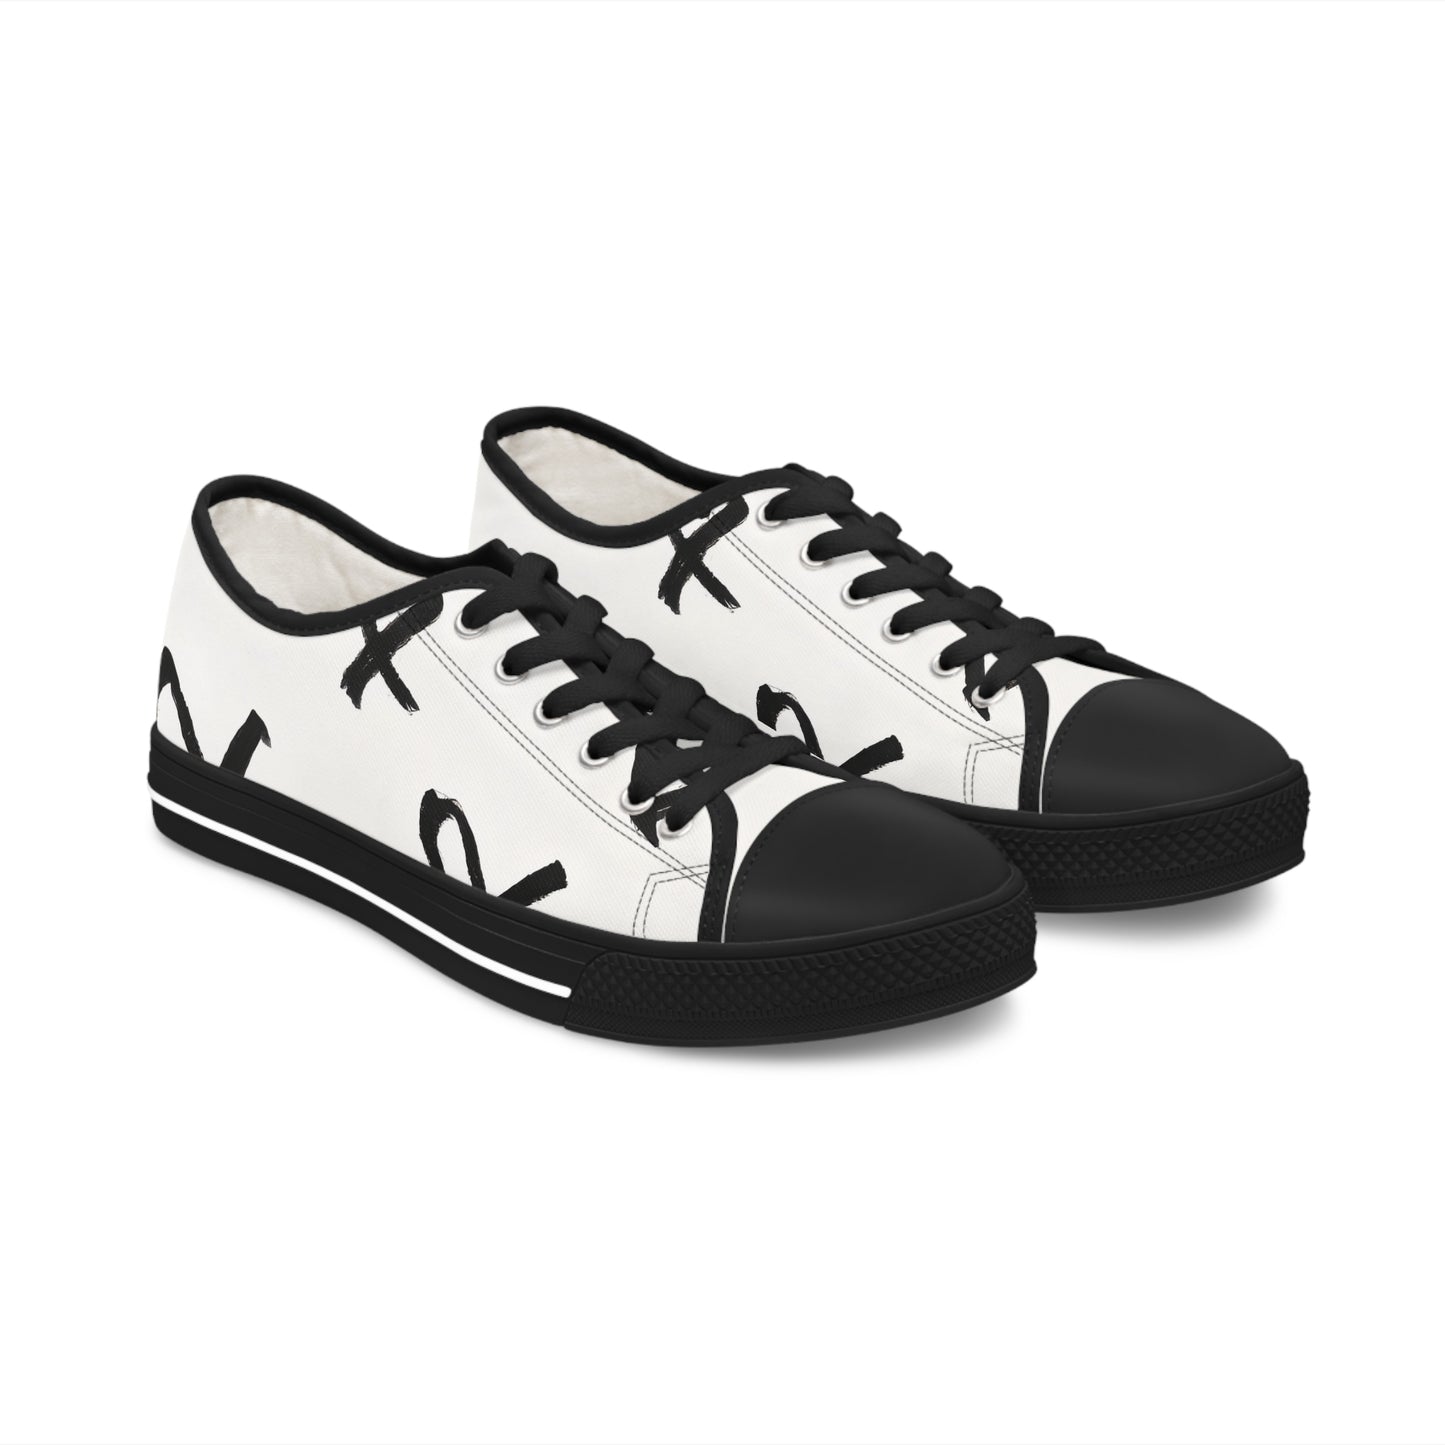 Cion Evelyn - Women's Low-Top Sneakers